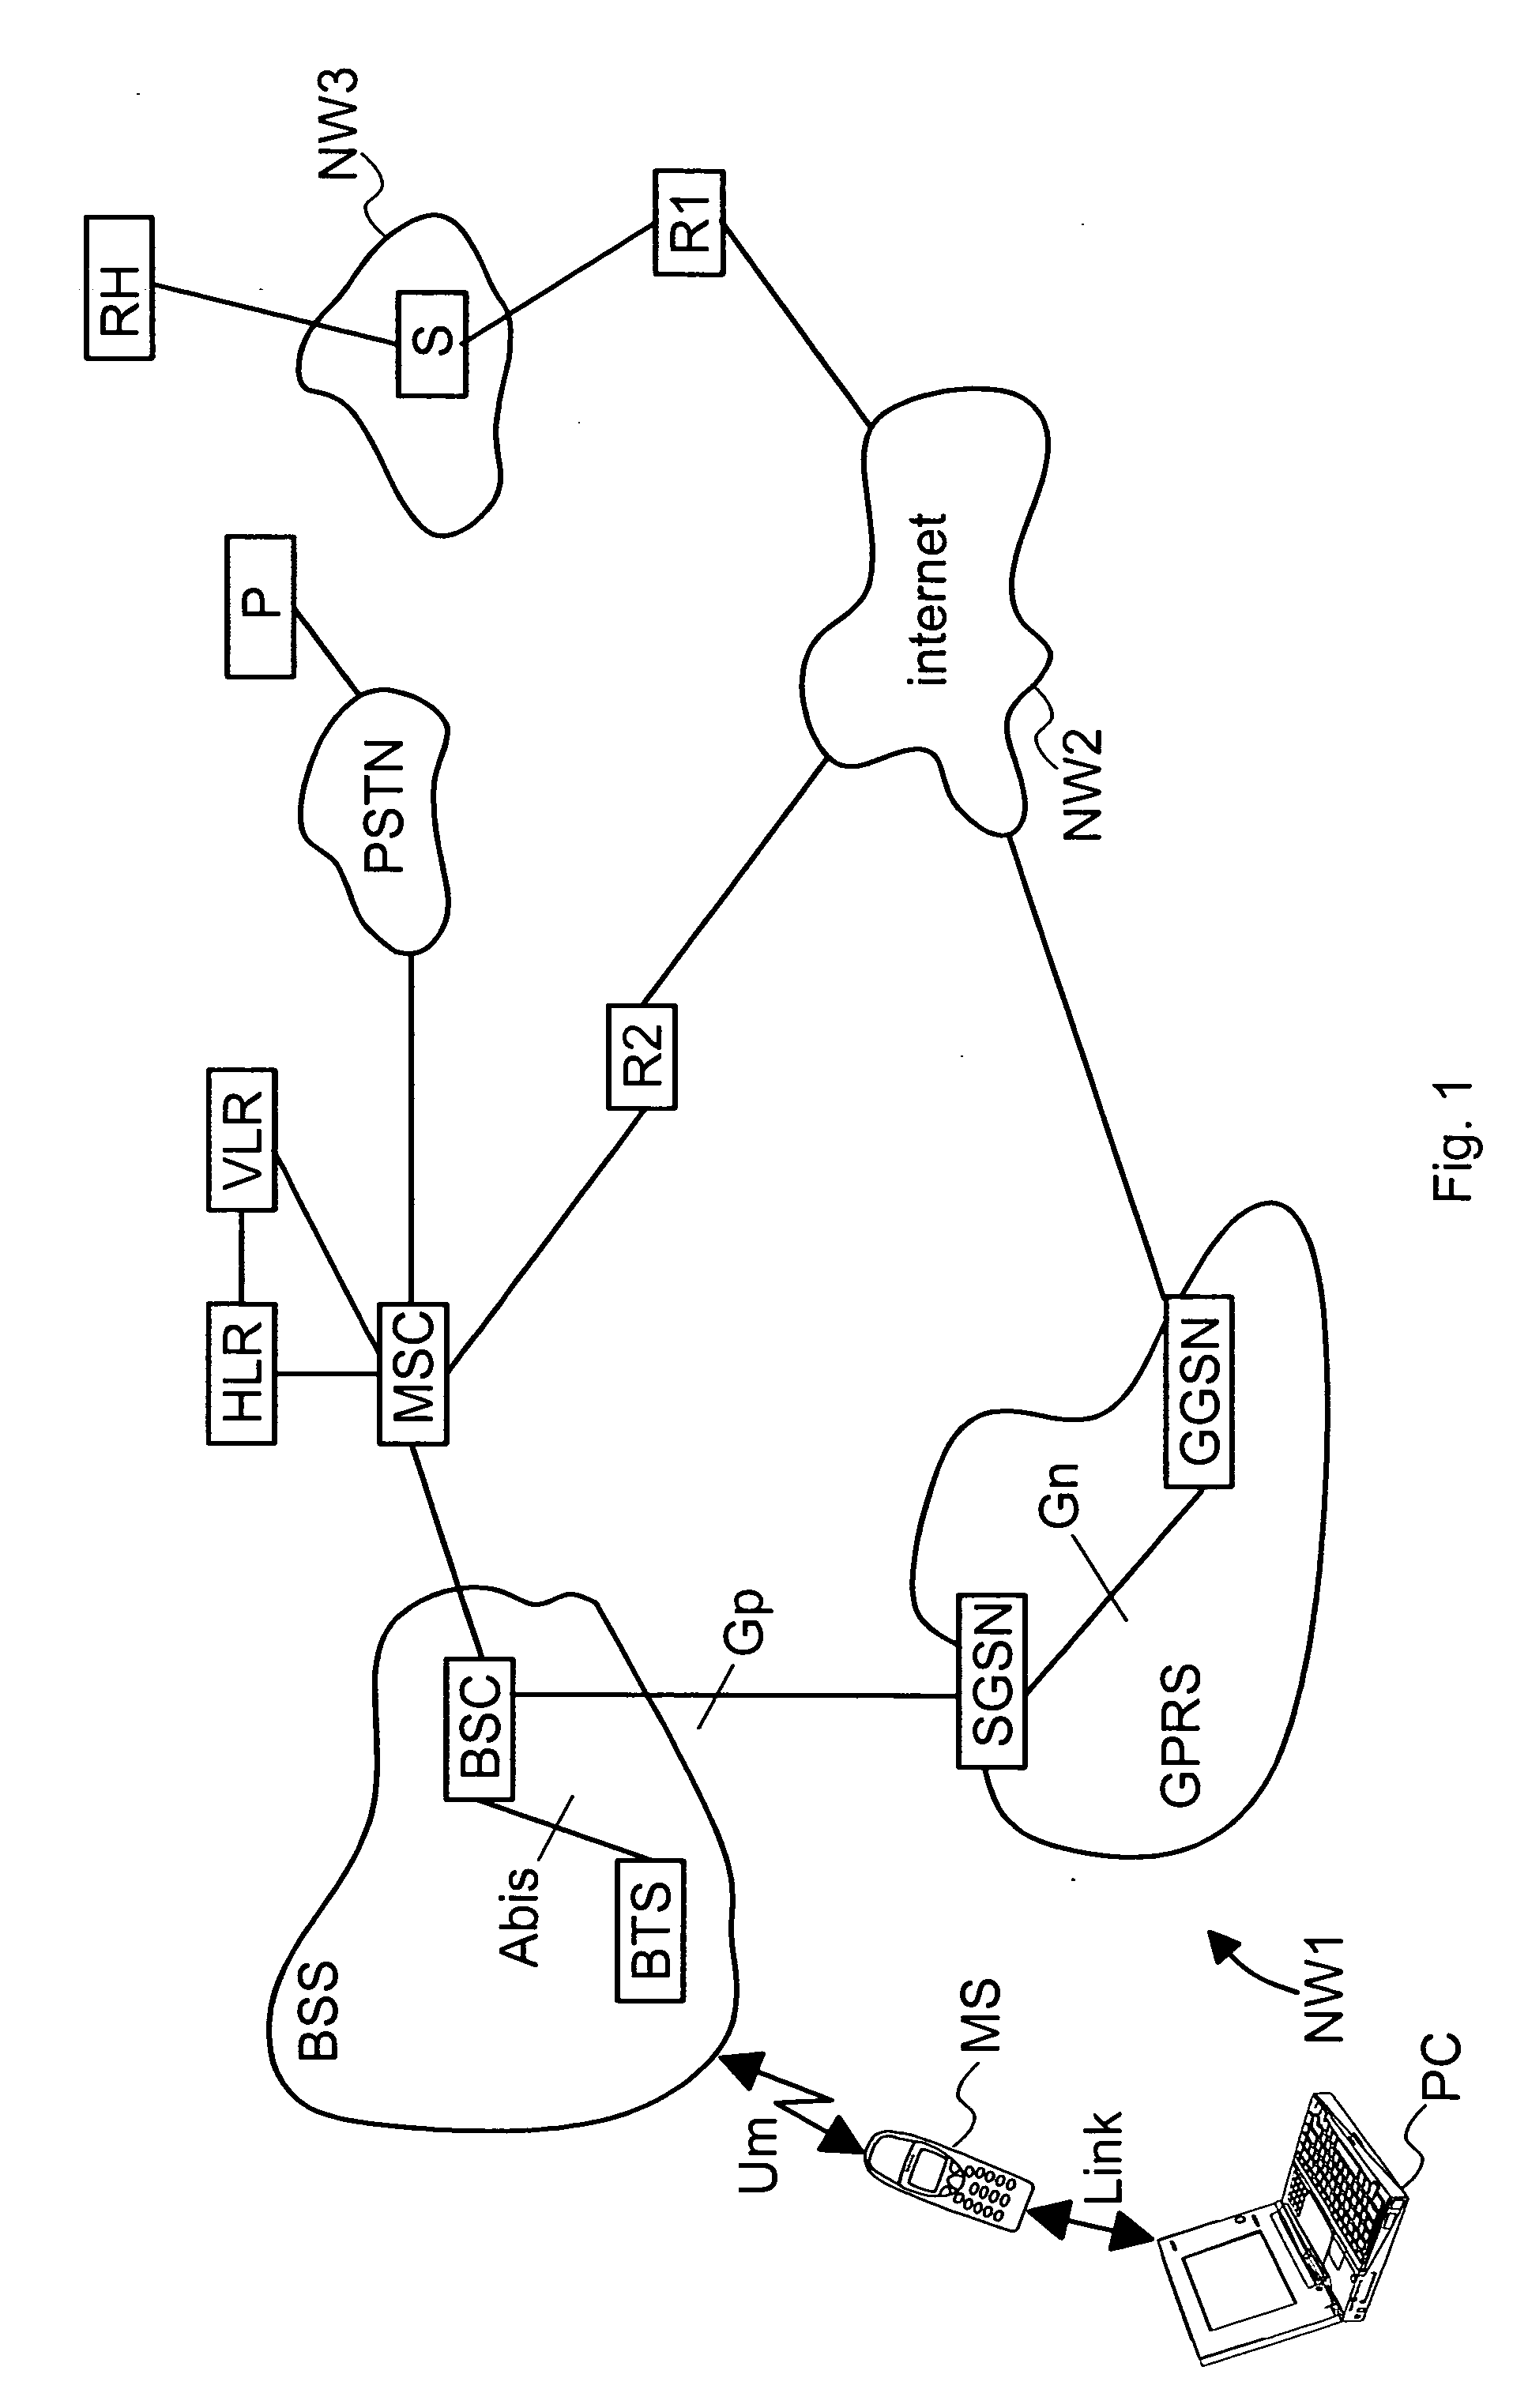 Provision of a data transmission connection